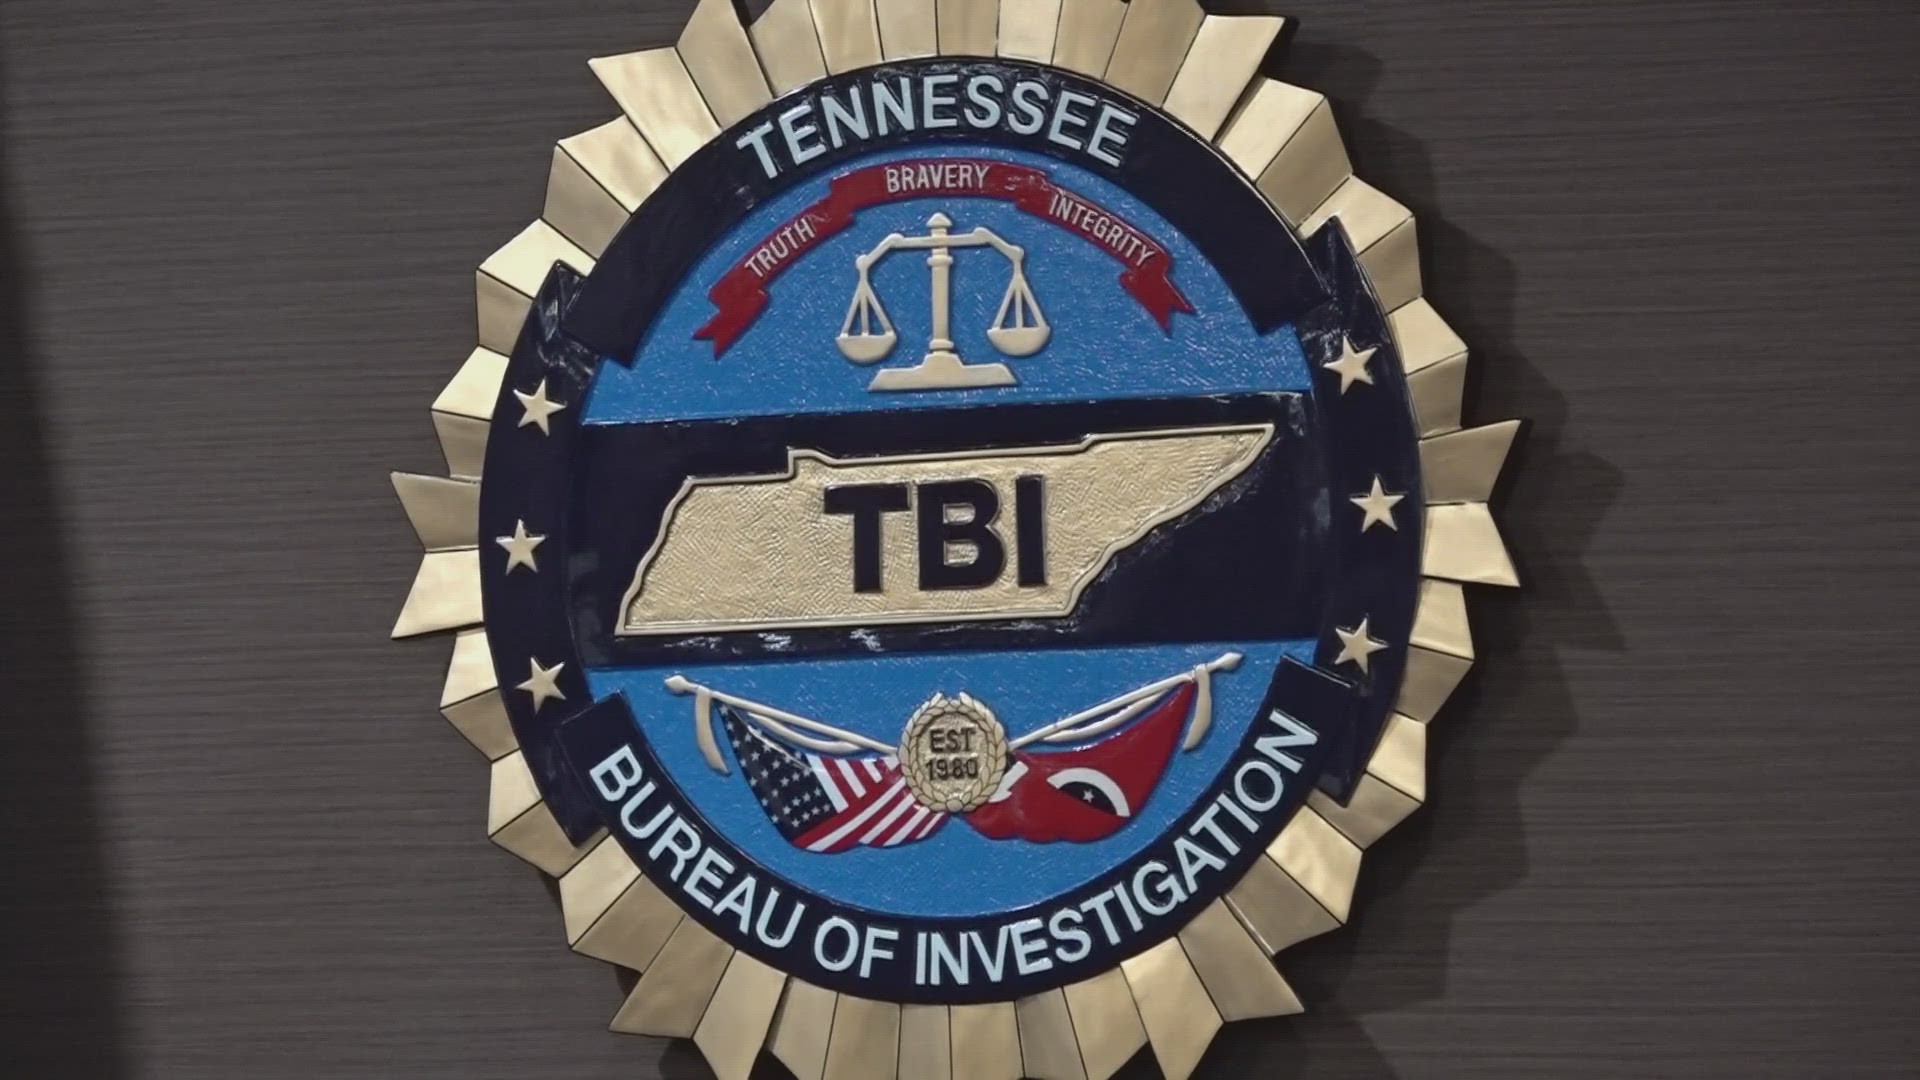 The state agency has created a web page detailing the cases, many of which are from East Tennessee.